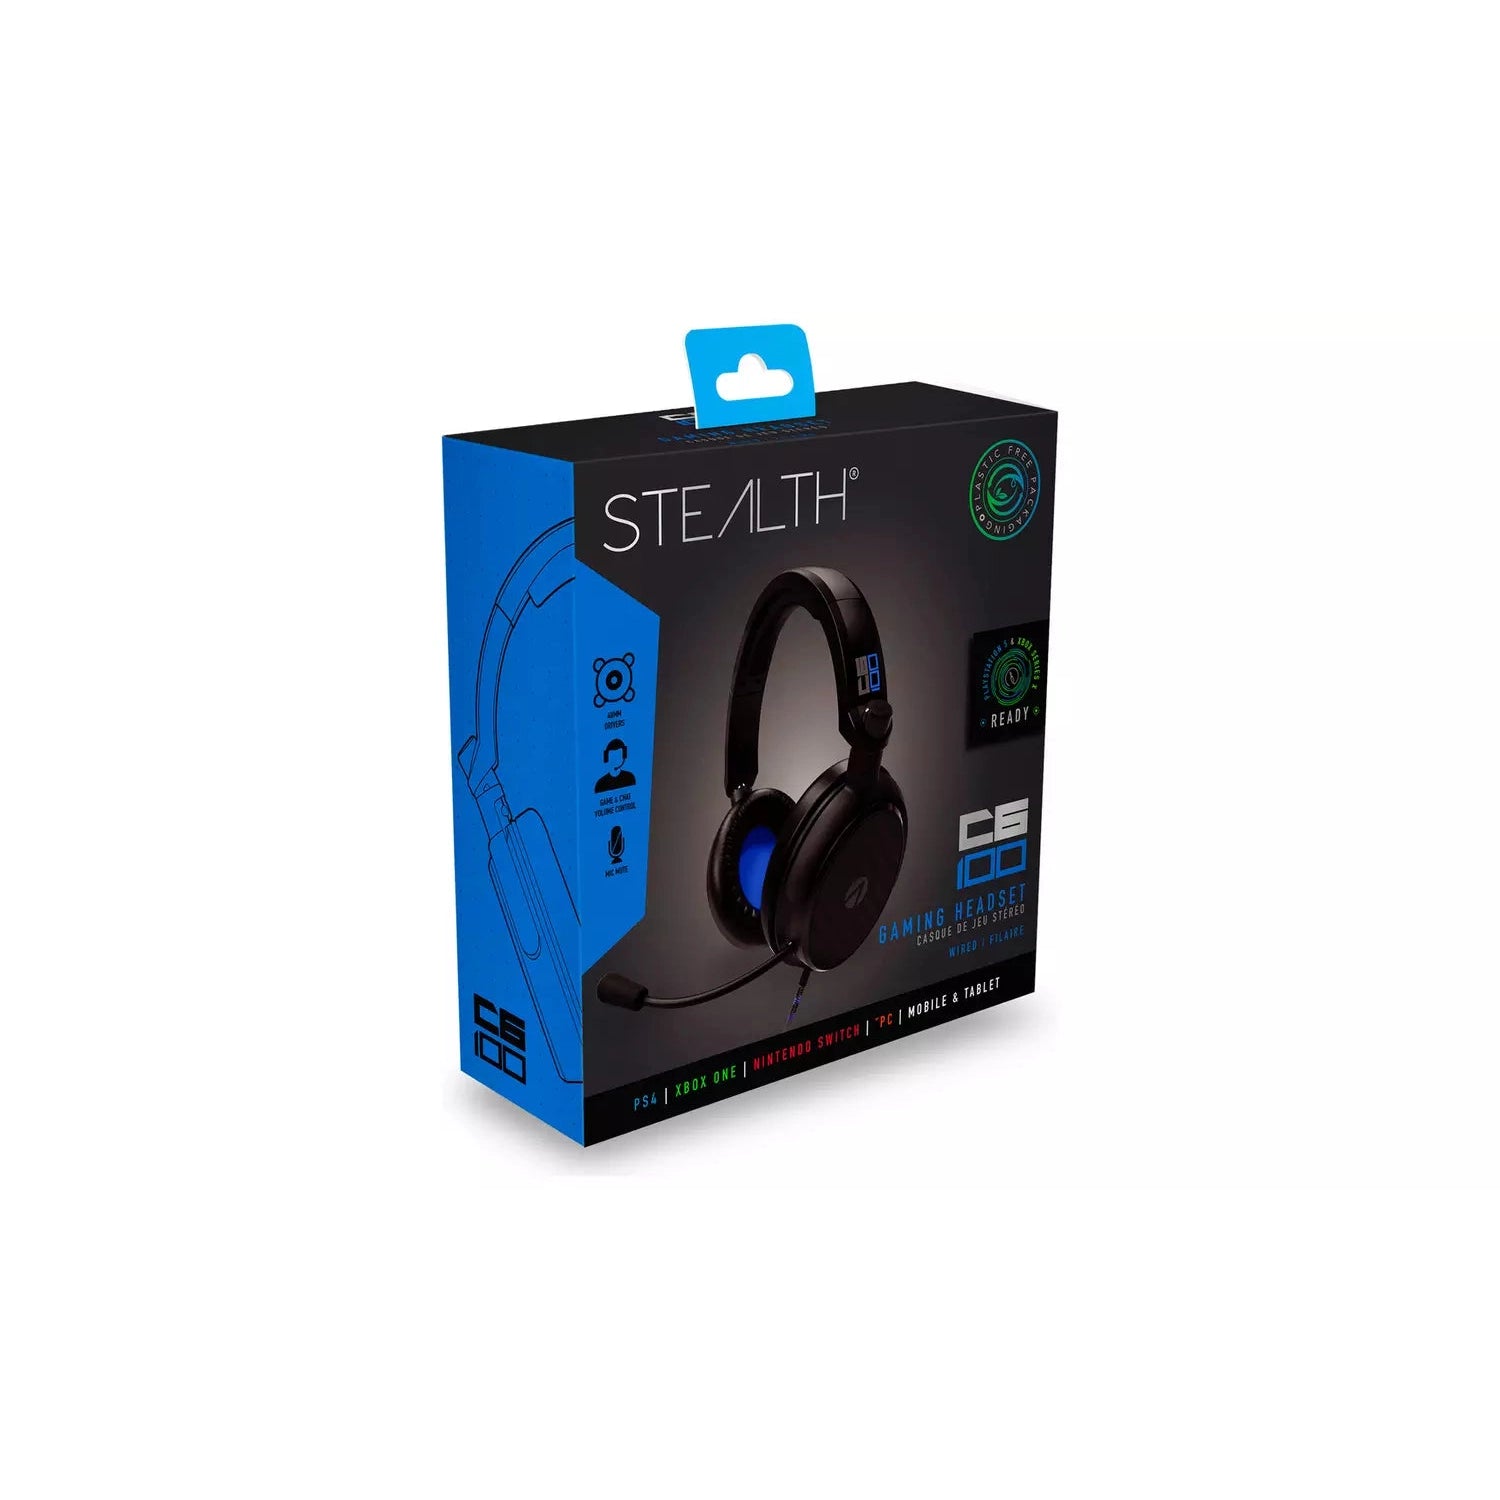 Go Gaming and | Stand C6-100 Must Stealth Headset Stock